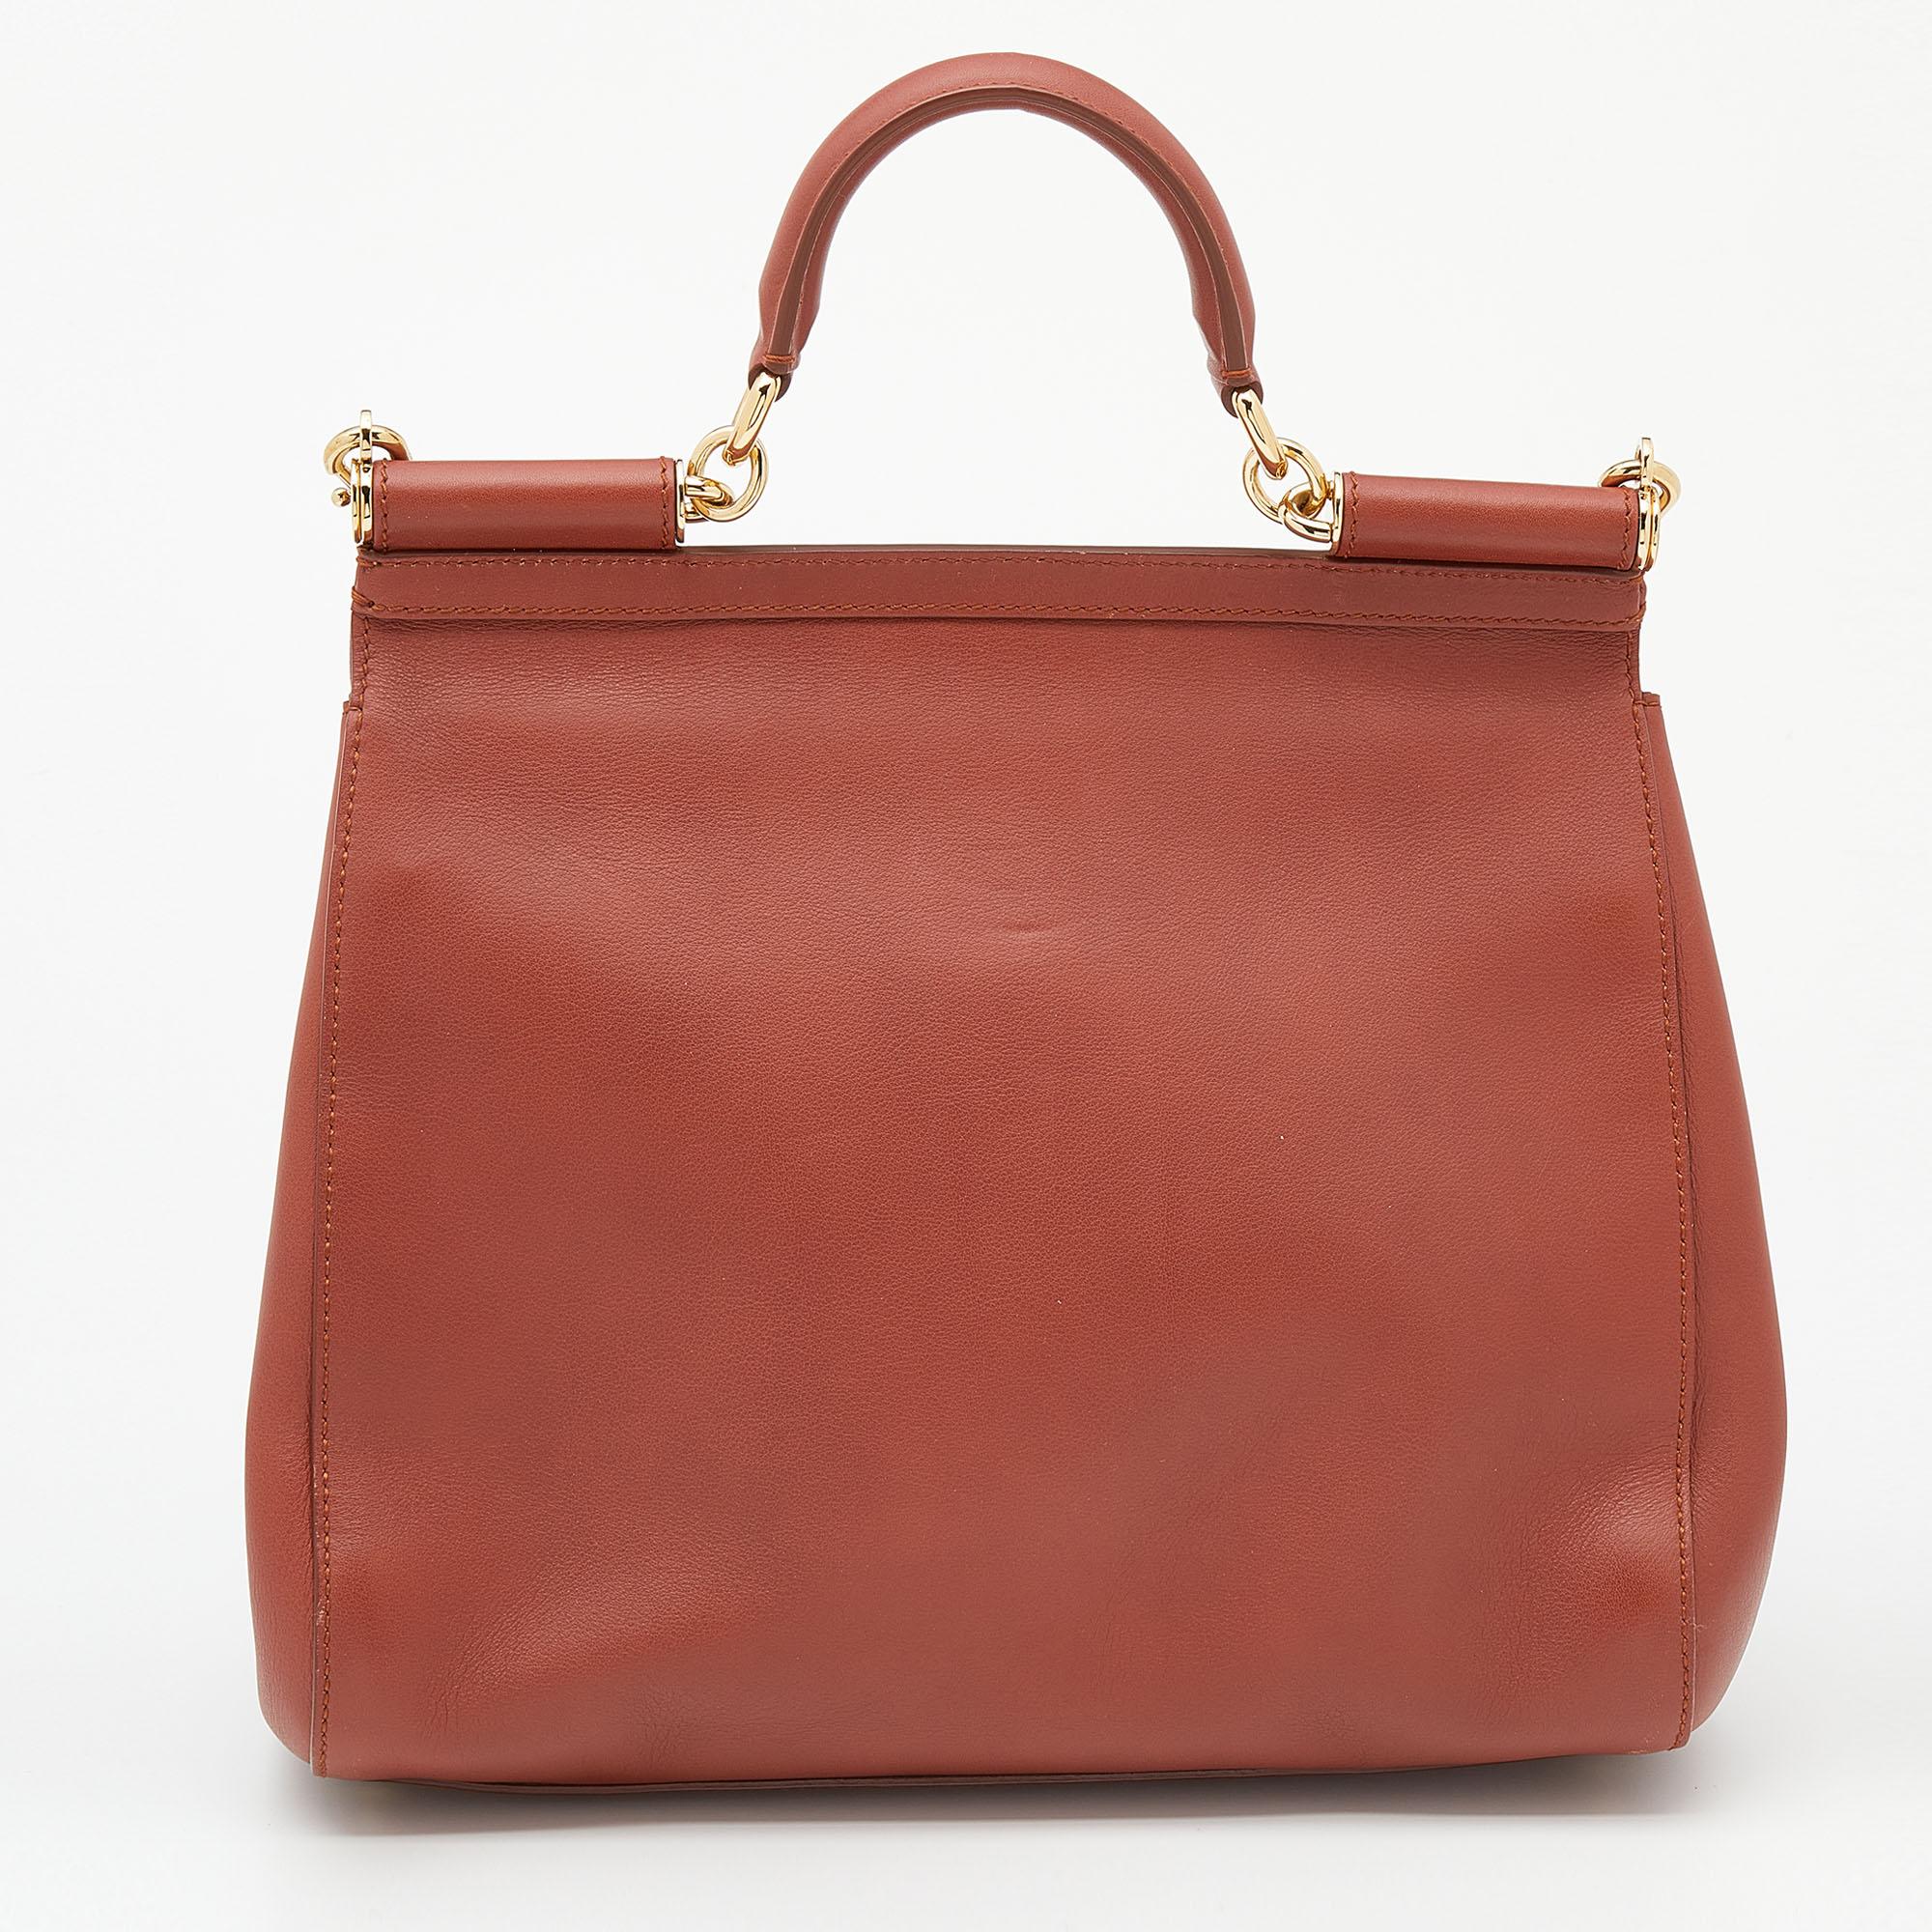 Meticulously crafted into an eye-catchy shape, this Miss Sicily bag from the House of Dolce & Gabbana exudes just the right amount of charm and elegance! It is made from rust-orange leather, with a gold-toned logo plaque accentuating the front. It